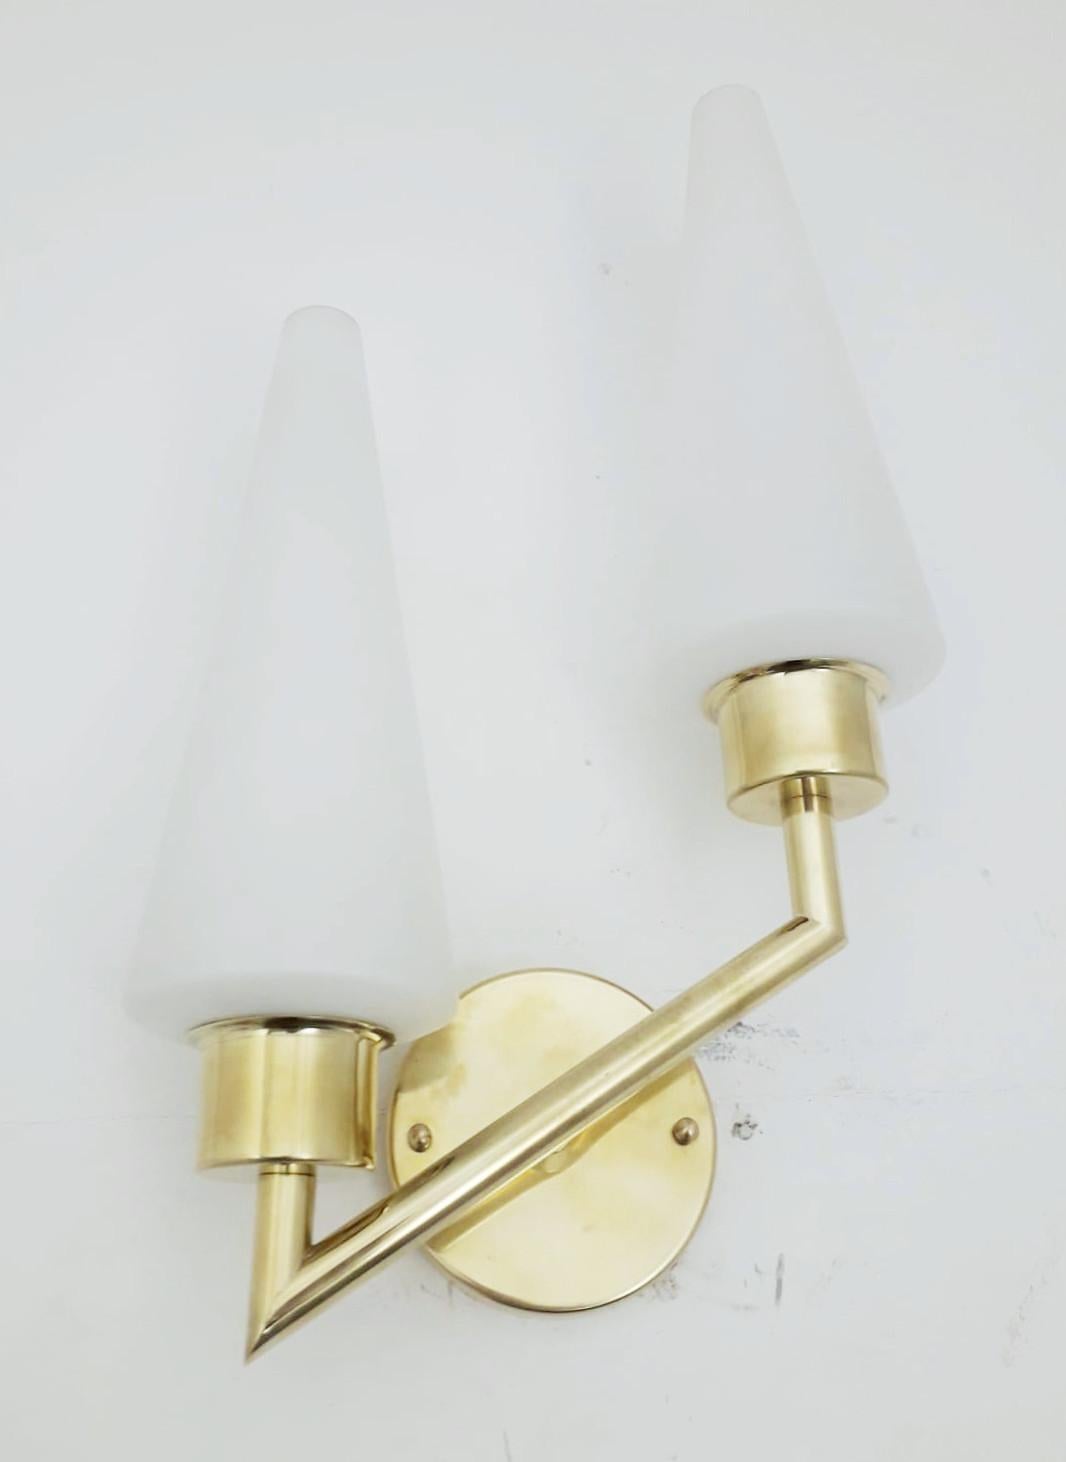 Italian Midcentury Double Cone Stilnovo Sconce - 10 available For Sale